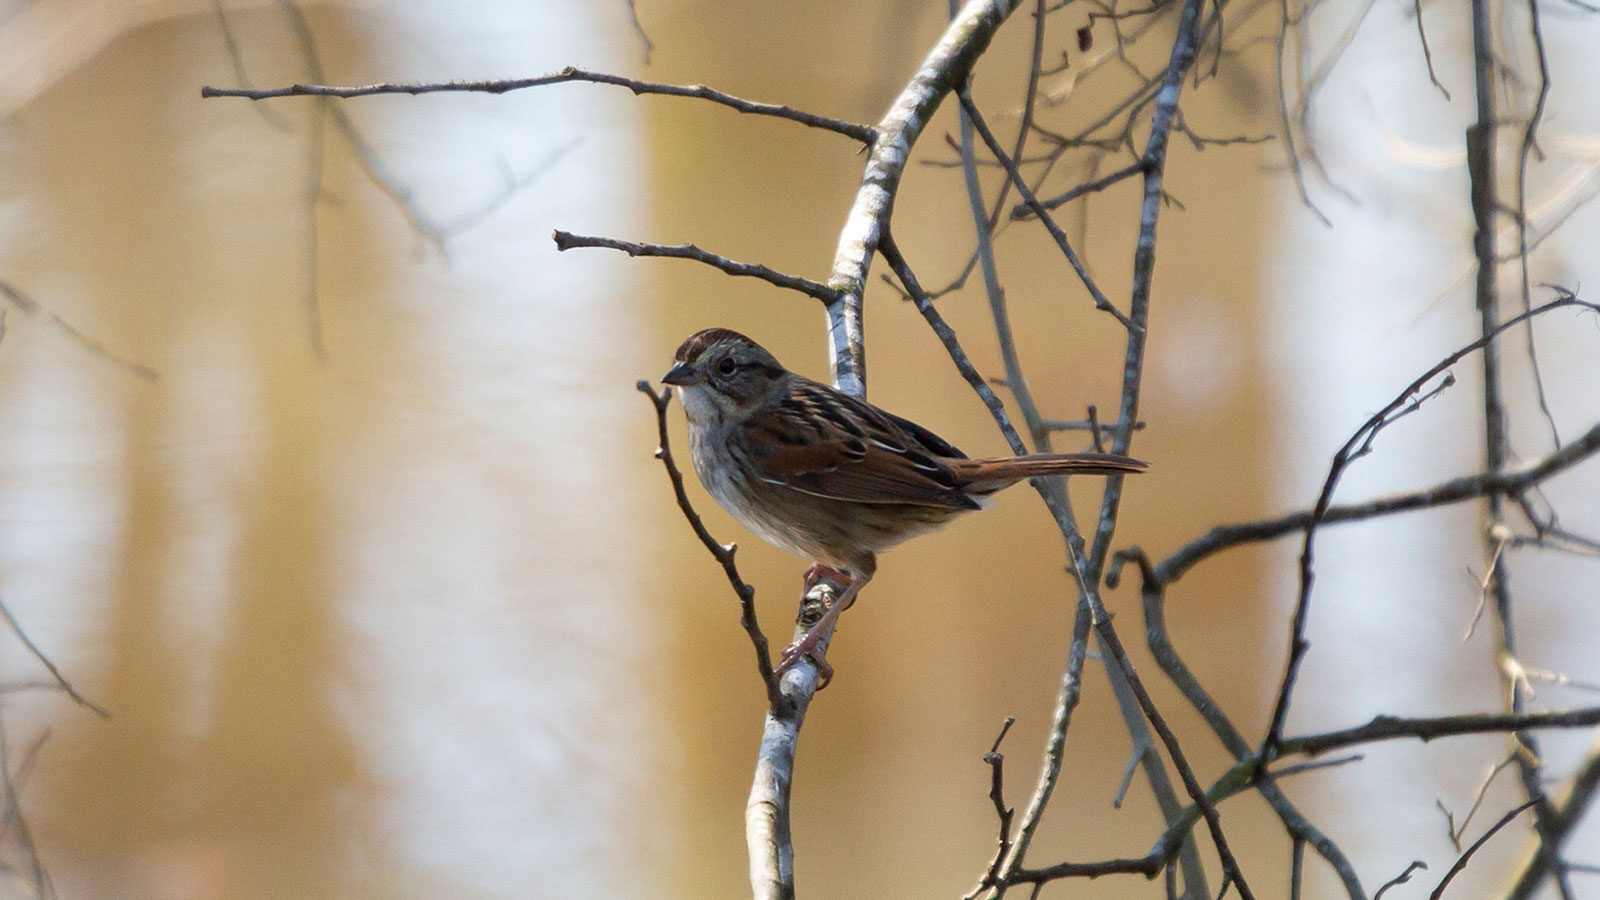 LIncoln's sparrow perched on a tree branch over murky water